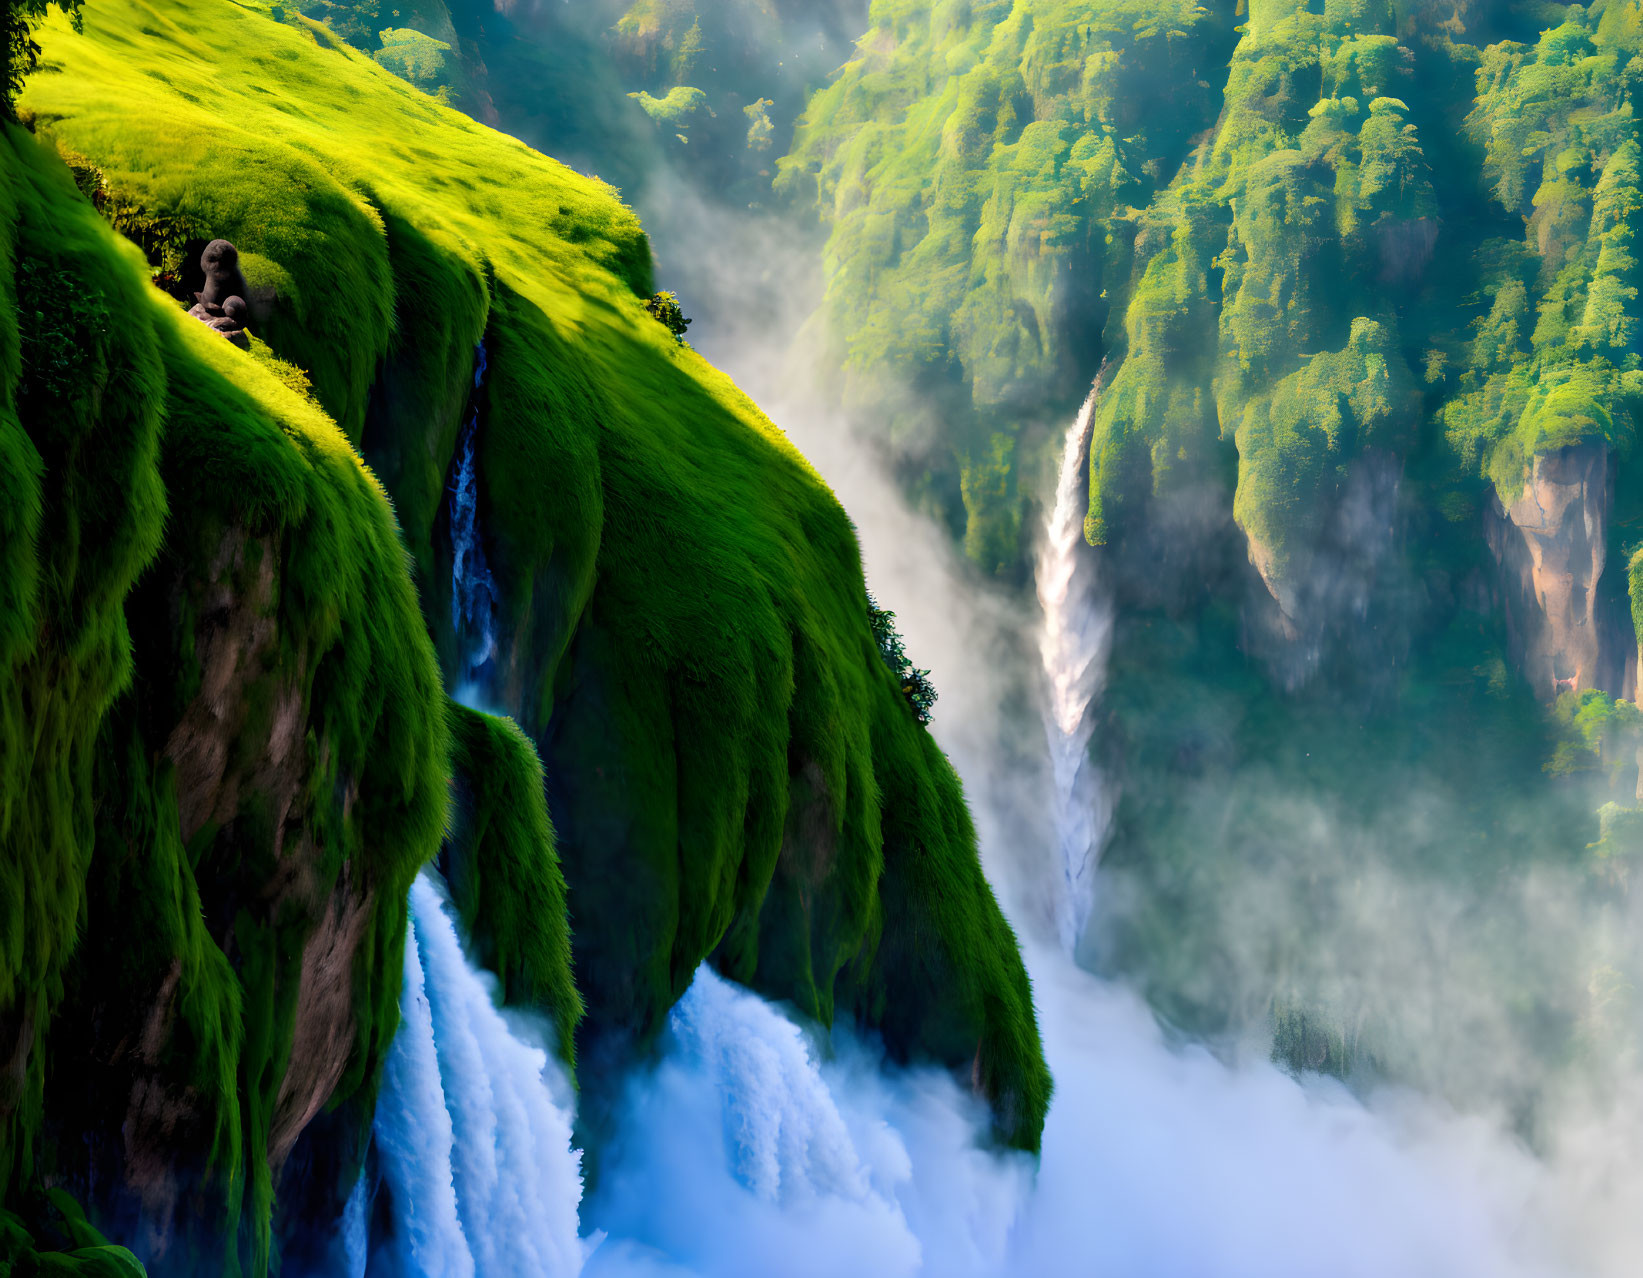 Majestic waterfall in lush greenery with cascading water and vibrant vegetation